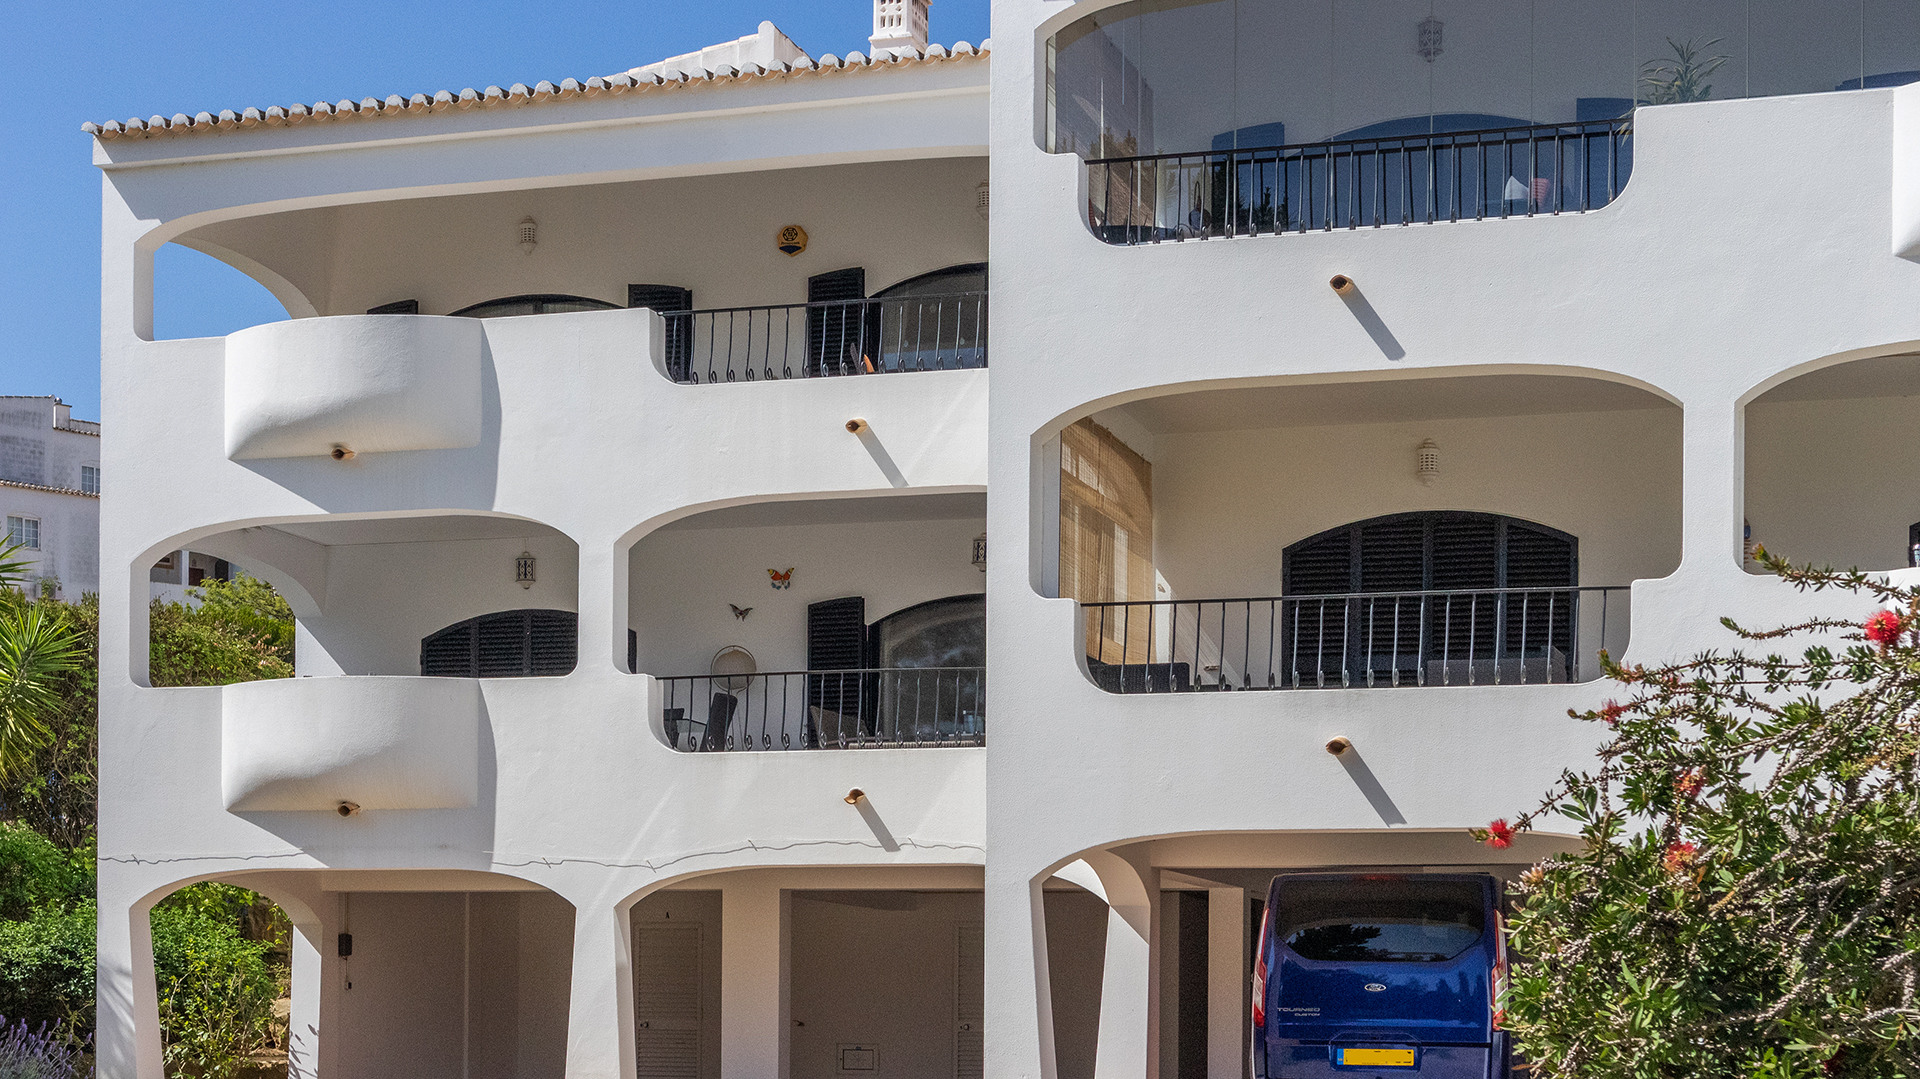 2 bedroom apartment with shared pool in golf resort, near the beach, Alvor | LG1918 This 2 bedroom apartment is located on the top floor overlooking the golf course and close to the traditional fishing village of Alvor and the beautiful and long sandy beaches of Portimão.